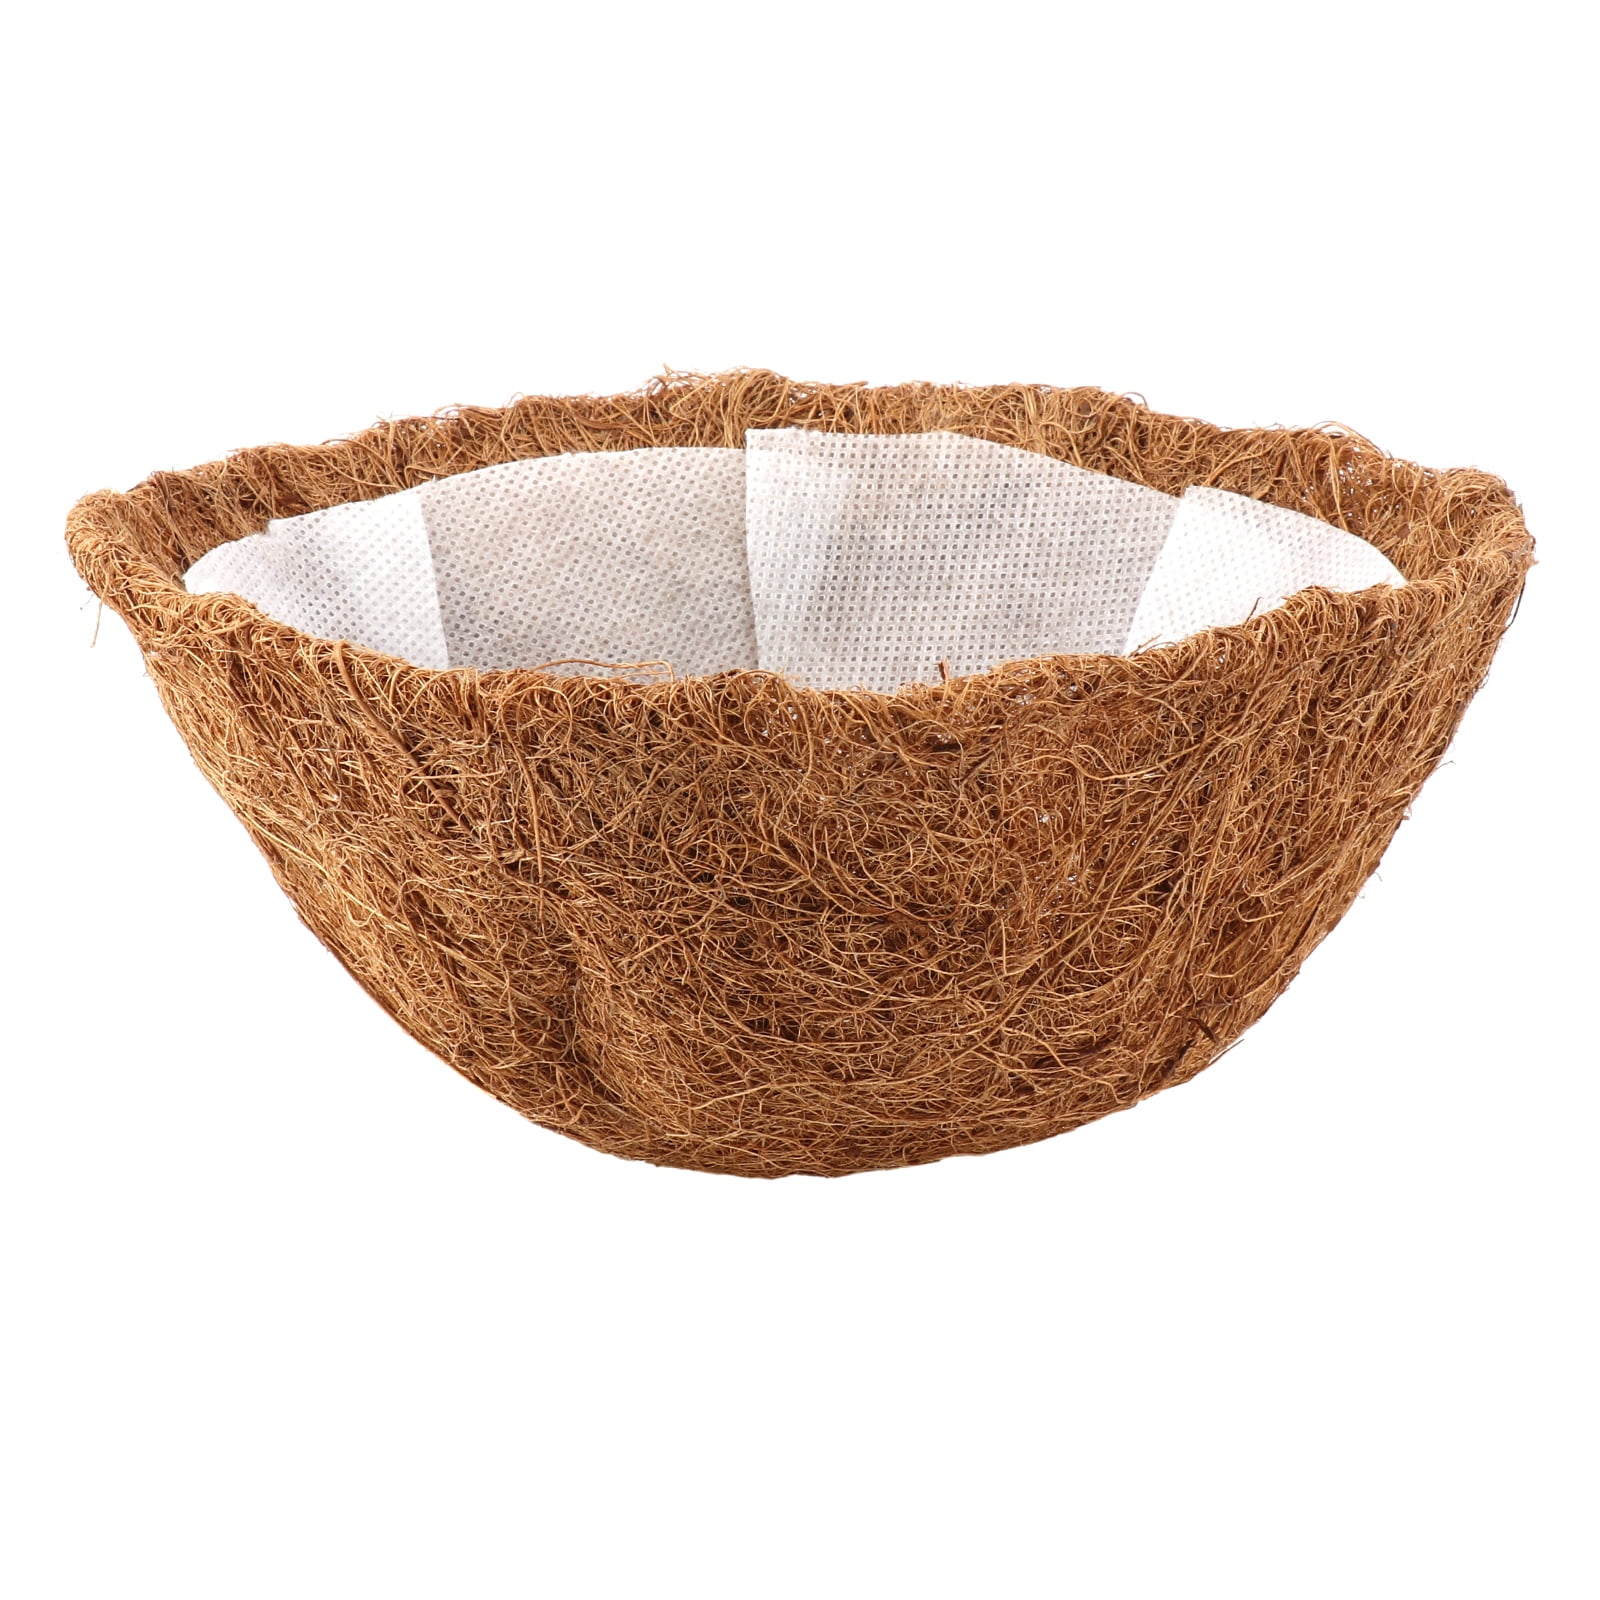 Planter Basket Liners,Coconut Palm Mat Flower Basket Plastic Wall Basket Coconut Palm Basket Mat can be Used on The Surface of The Basket Wall Floor etc.